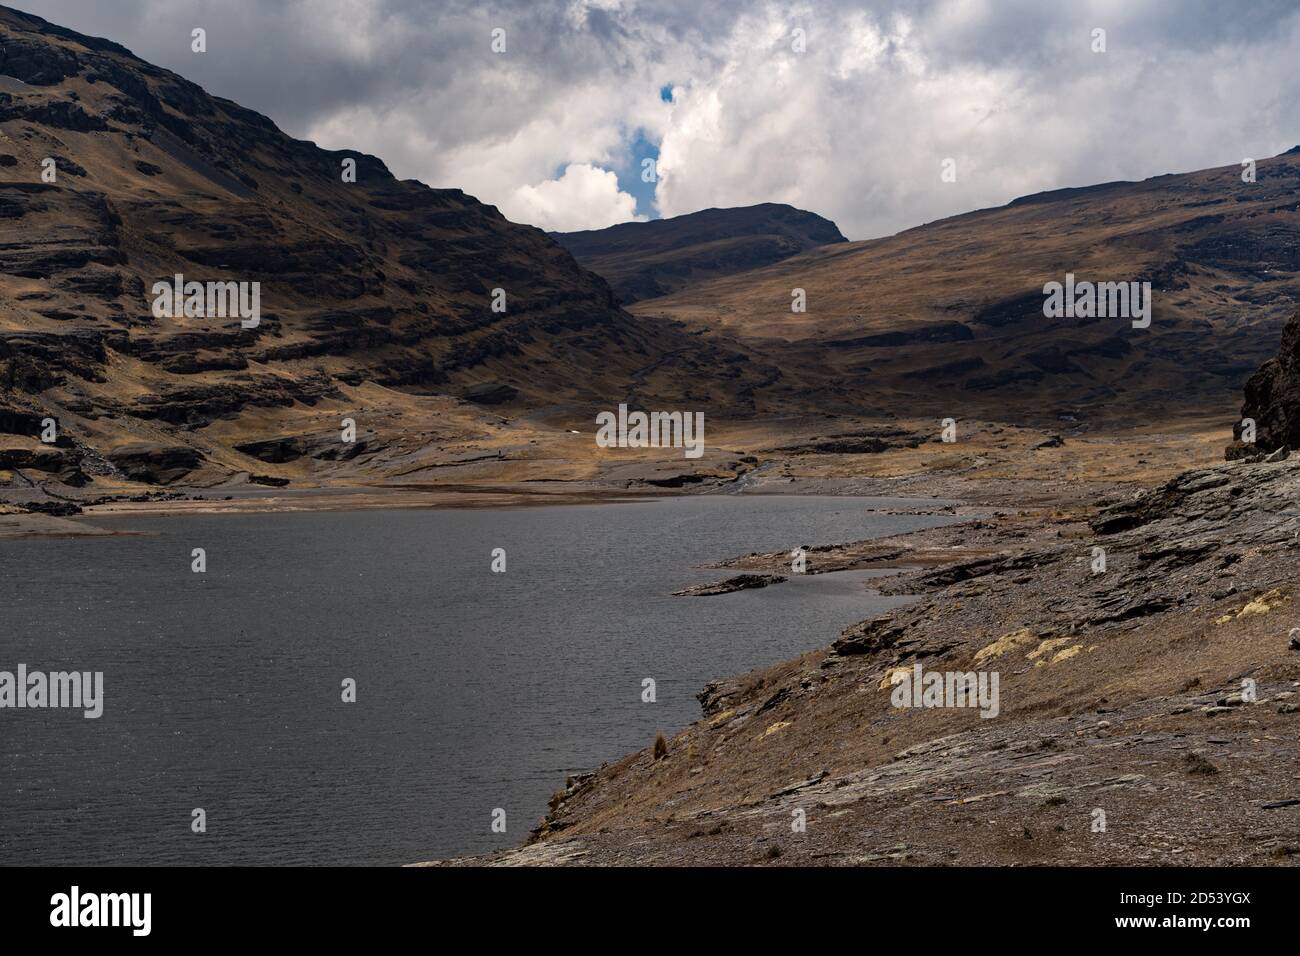 Andean Lagoon. Andean landscape Stock Photo